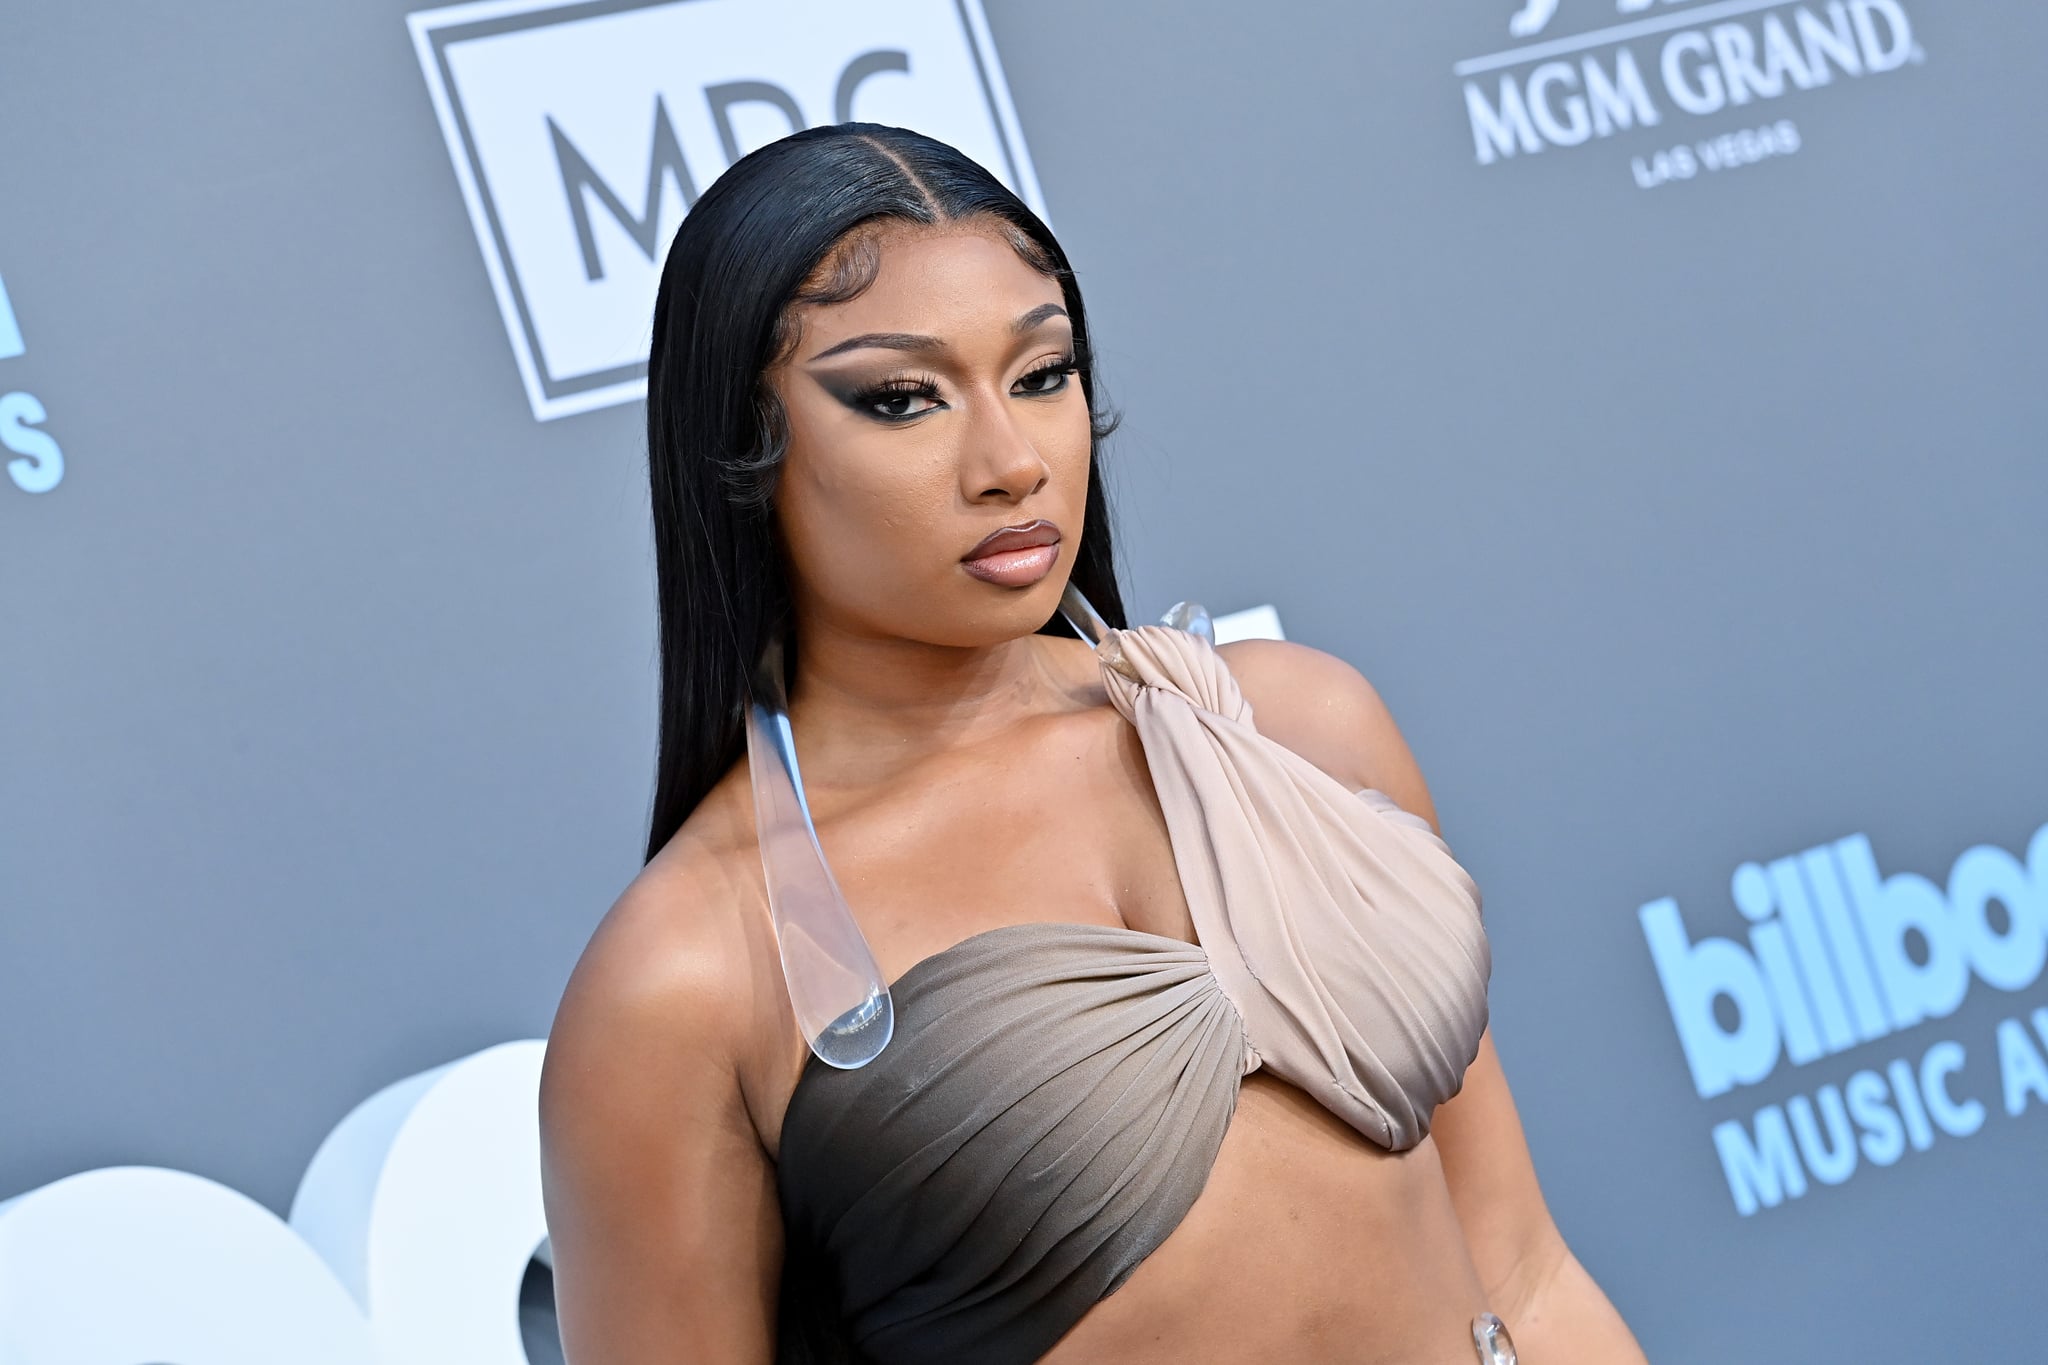 LAS VEGAS, NEVADA - MAY 15: Megan Thee Stallion attends the 2022 Billboard Music Awards at MGM Grand Garden Arena on May 15, 2022 in Las Vegas, Nevada. (Photo by Axelle/Bauer-Griffin/FilmMagic)